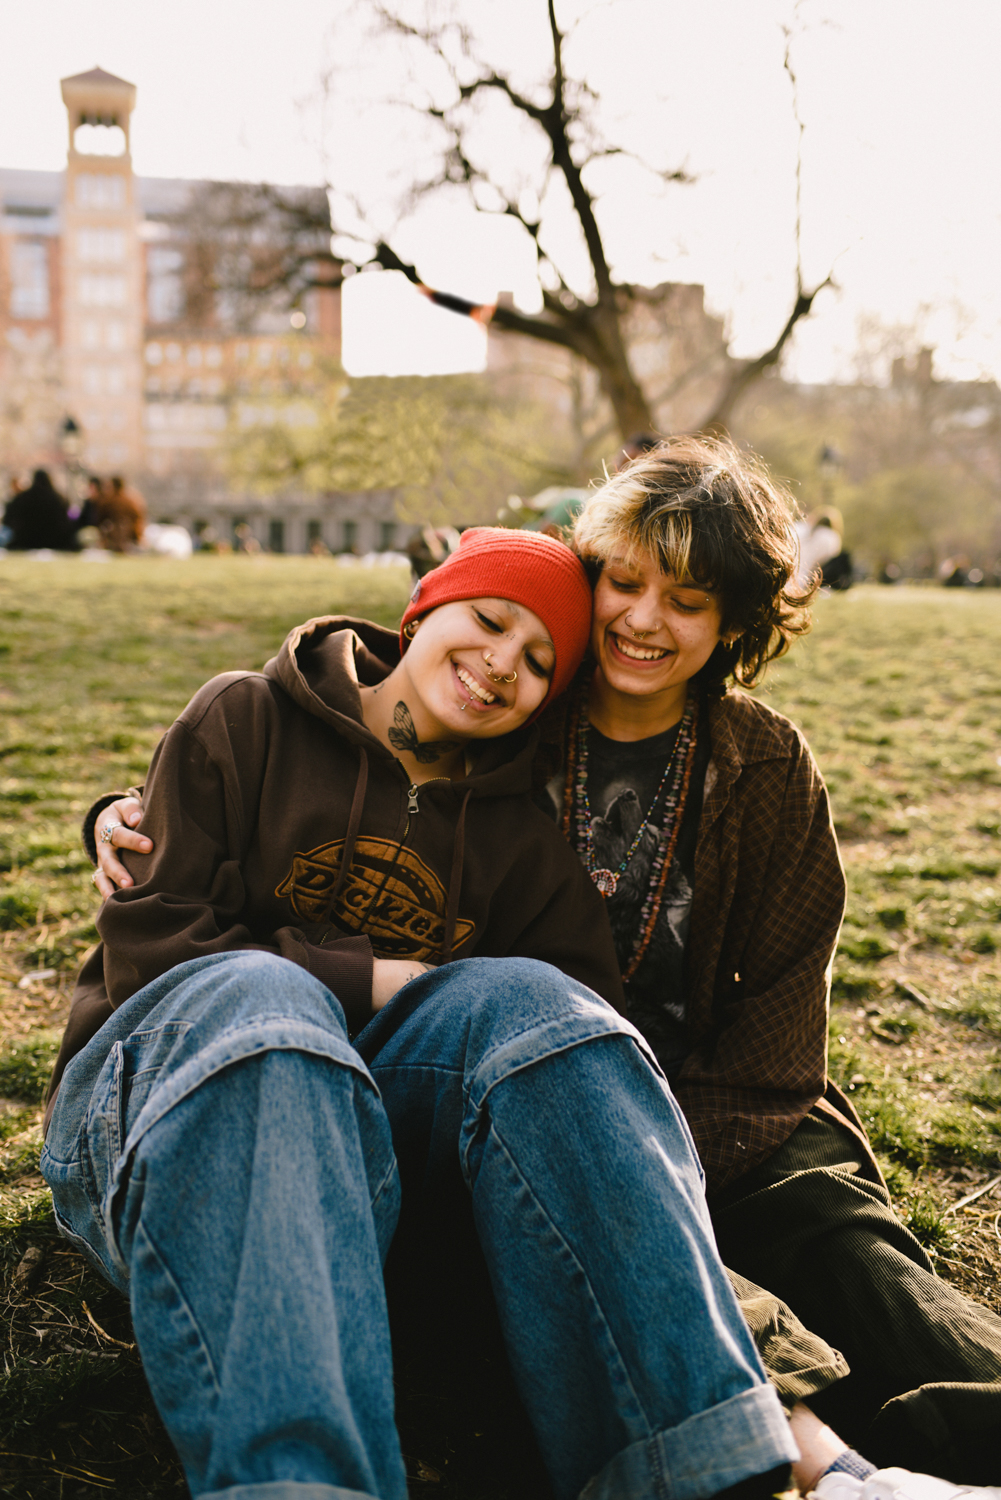 Koda Fraga and Leo Koulish sit together on the grass in Washington Square Park with the sun shining on them. They are holding each other and smiling at the camera.